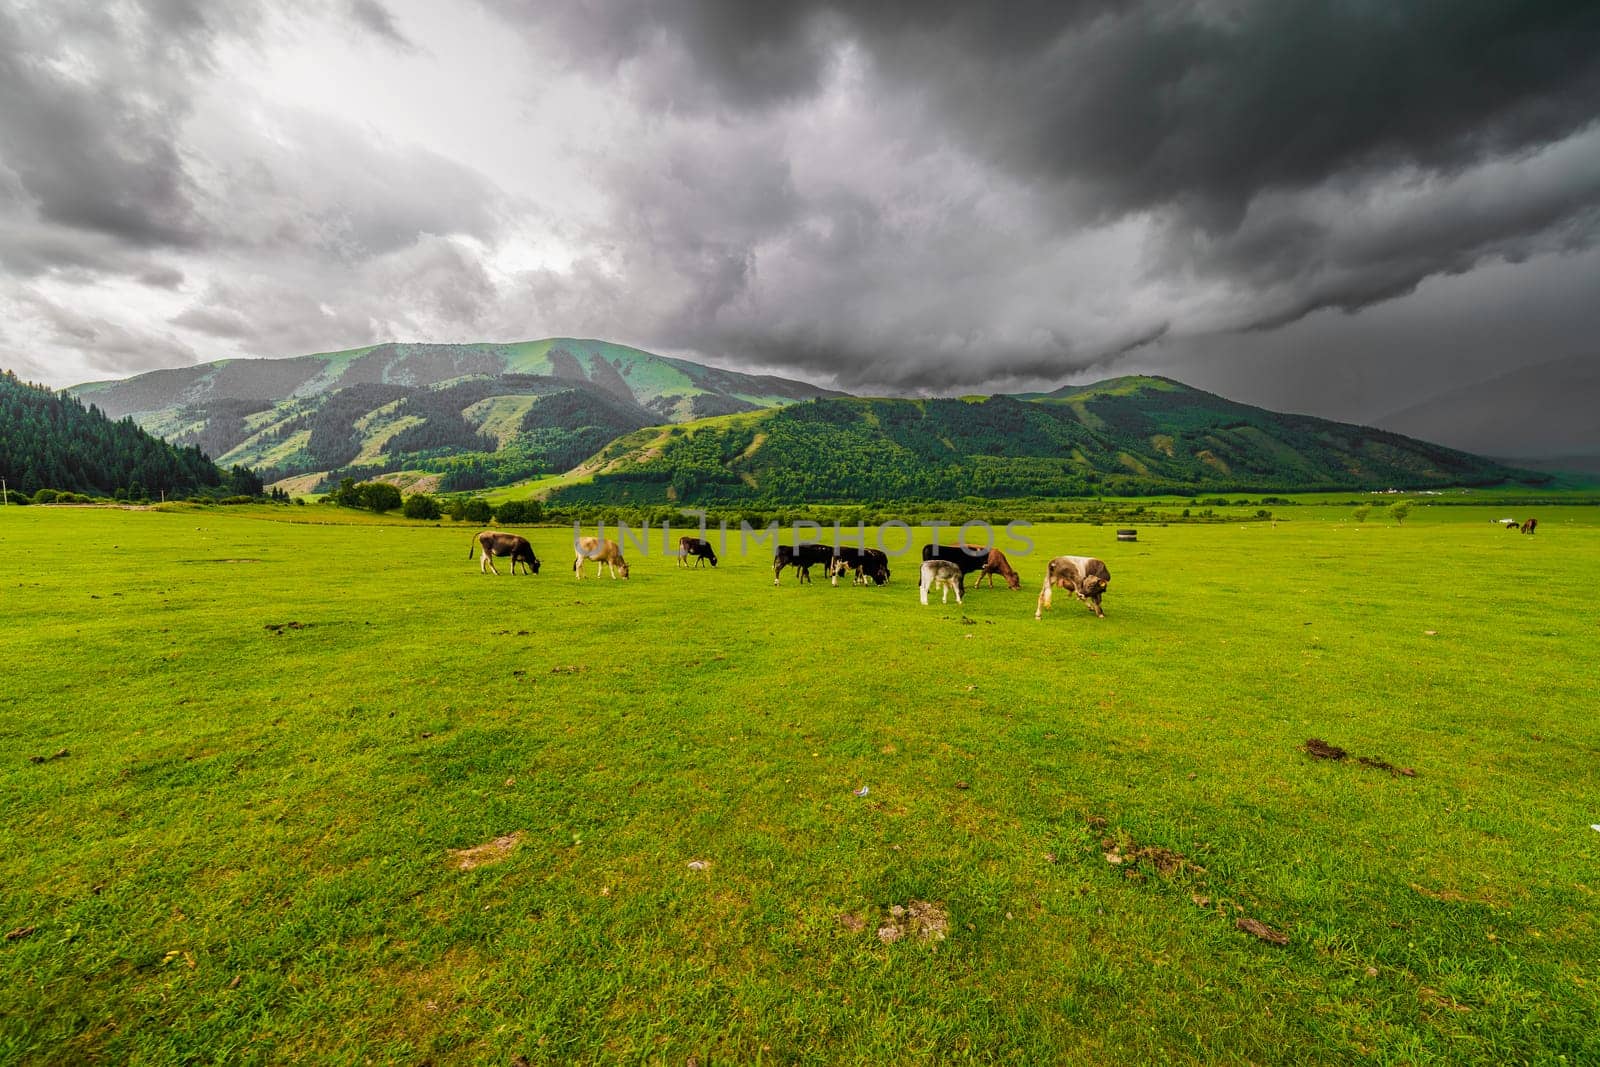 Cows grazing on green grass in mountainous natural landscape with cloudy sky by z1b